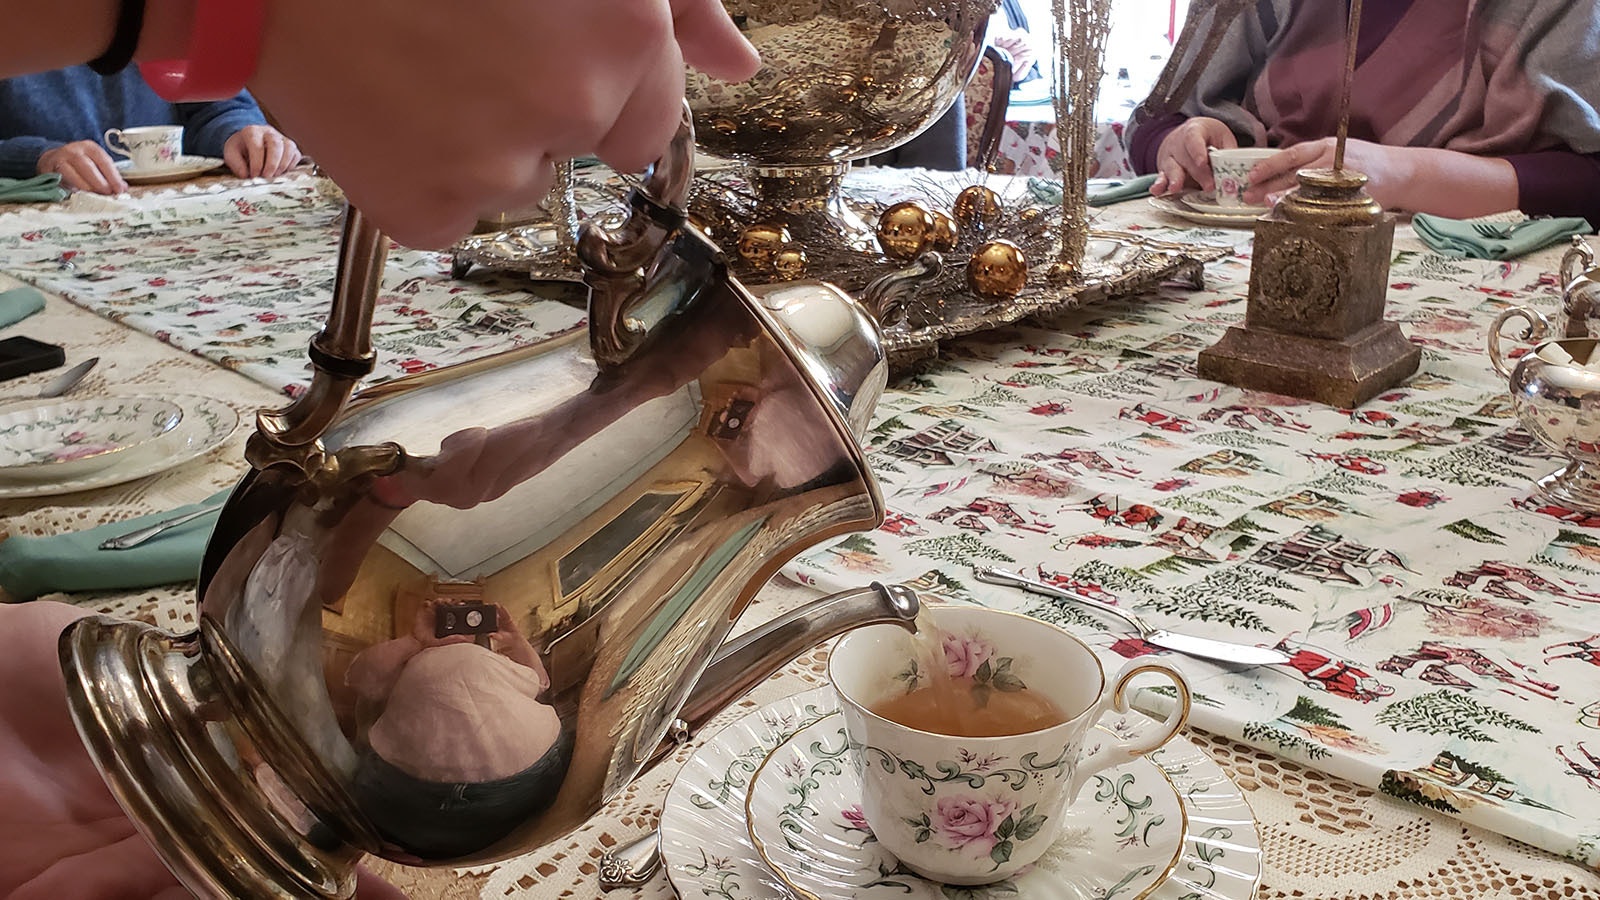 The fine china and silver teapots used during the Nagle-Warren Mansion's afternoon teas are reminiscent of the 1890s era.